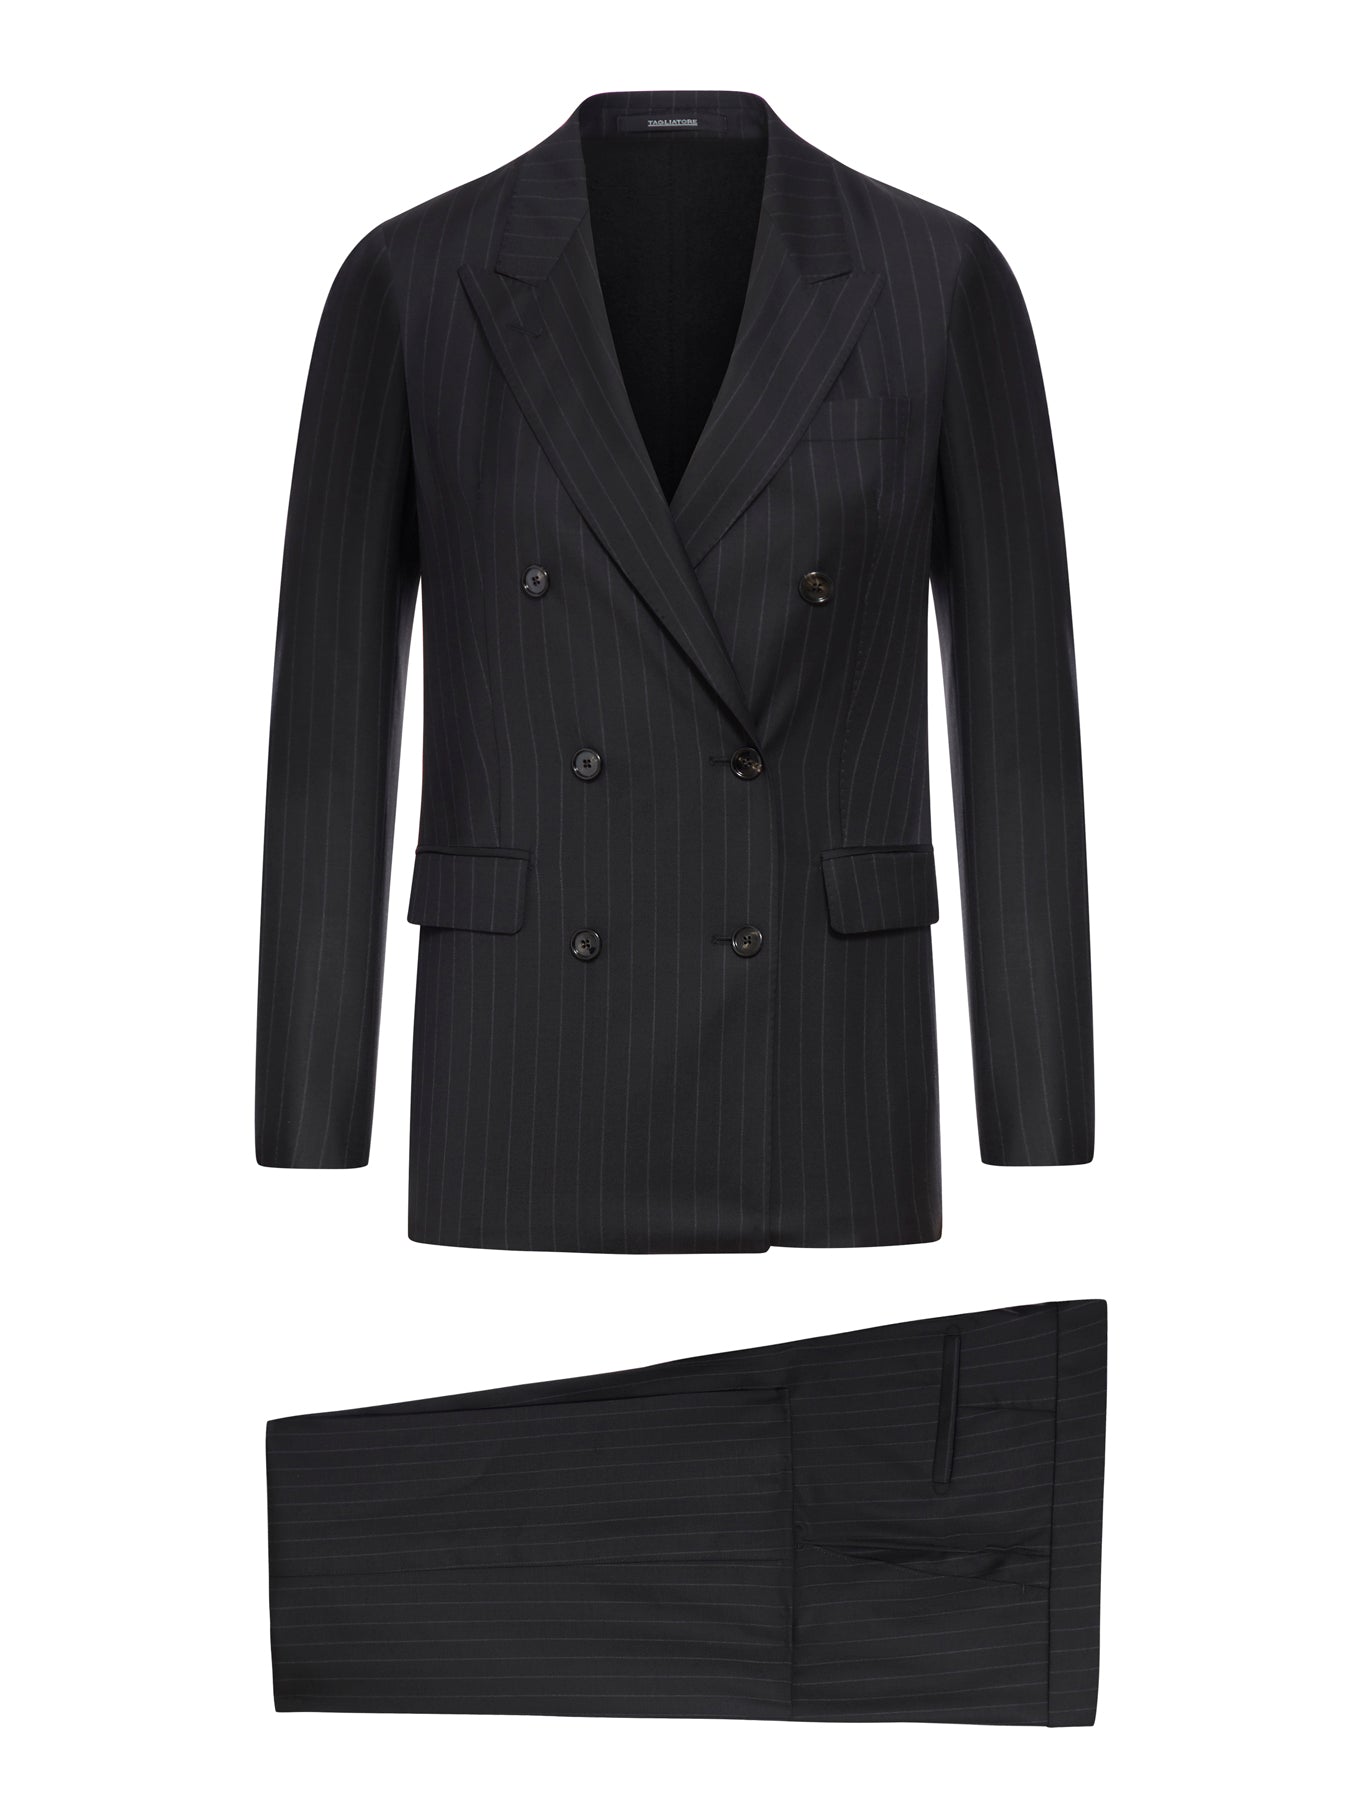 Tagliatore striped double-breasted suit - Grey